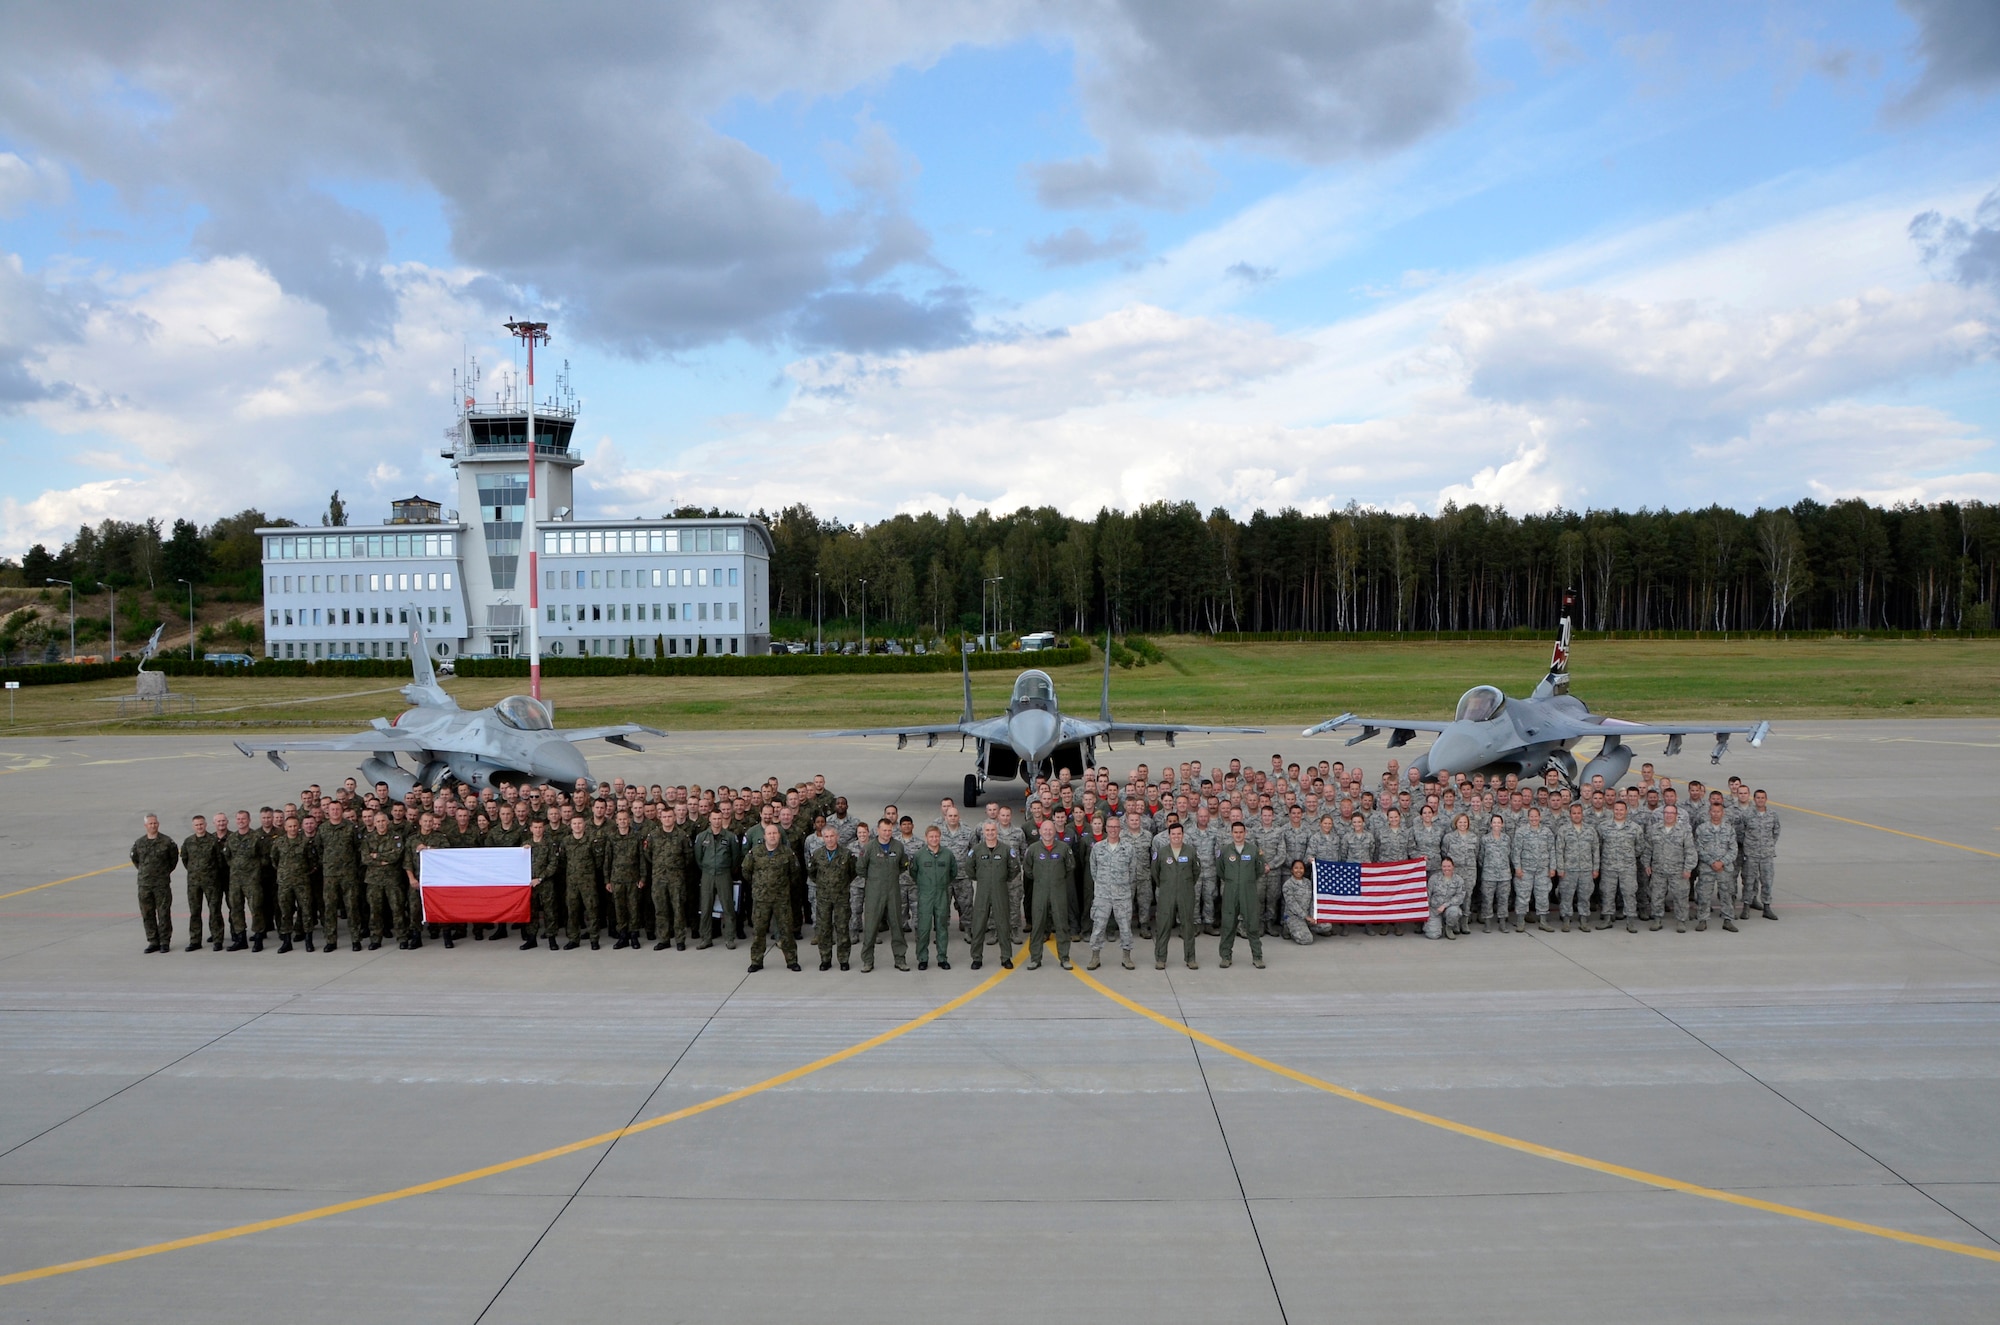 Members of the South Dakota Air National Guard, 52nd Operations Group Detachment 1, and the Polish air force, stand for a group photo at Lask Air Base, Poland, Sept. 22, 2016. The 114th Fighter Wing deployed more than 100 personnel in support of Aviation Detachment 16-4, a bilateral training exercise between the U.S. and Polish forces. The 114 FW was able to train alongside Polish allies in a variety of missions to include, close air support, air to air and air to ground. (U.S. Air National Guard photo by Capt. Amy Rittberger)